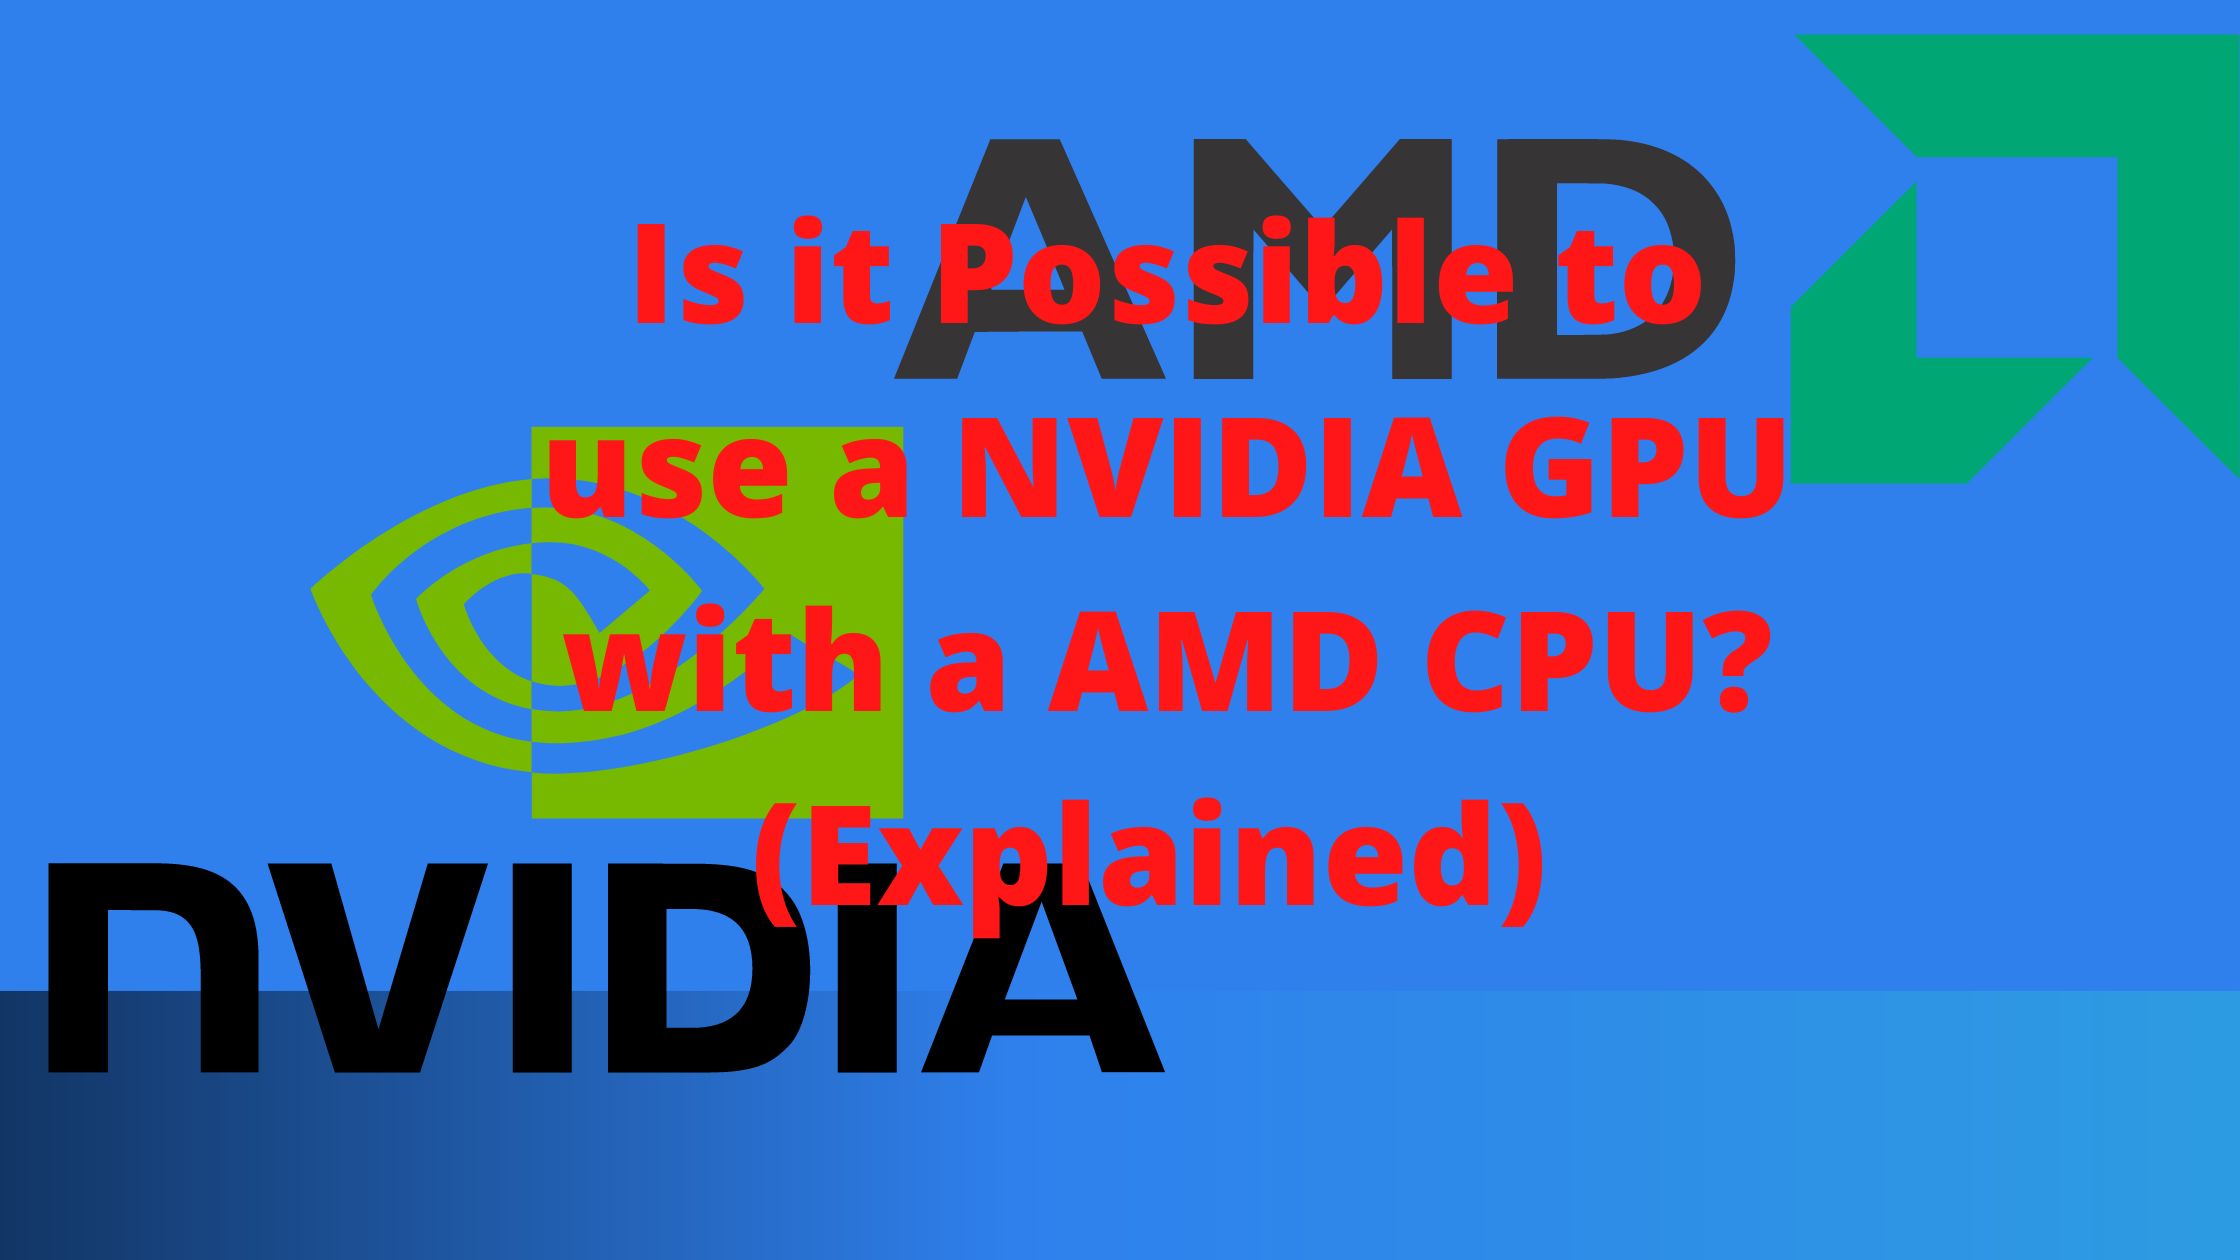 Is it Possible to use a NVIDIA GPU with a AMD CPU? (Explained)